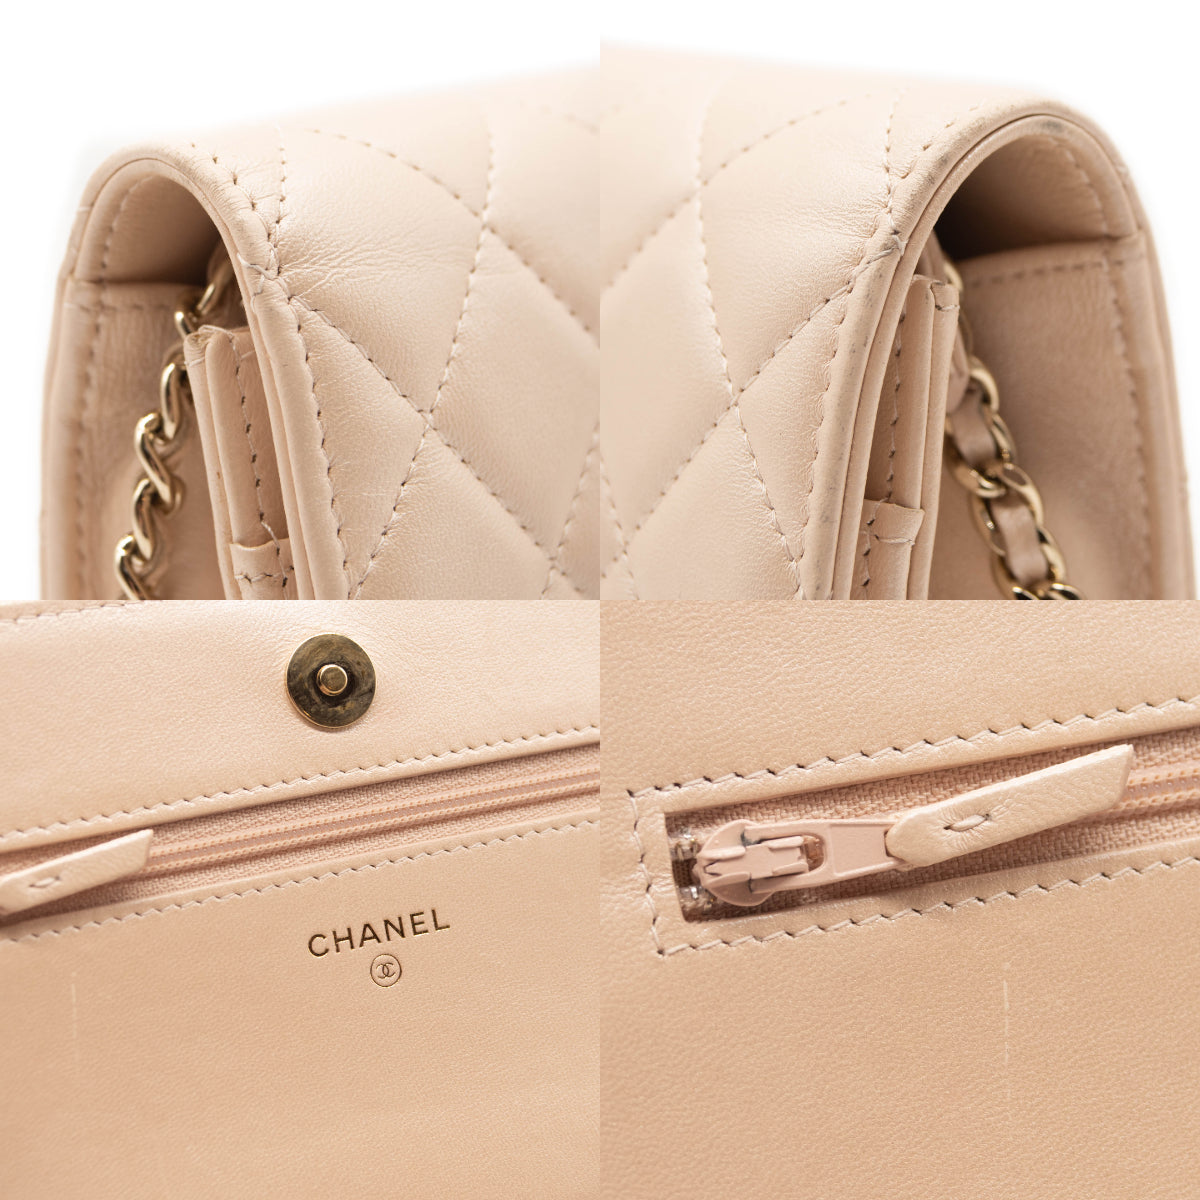 Chanel Quilted Caviar Maxi Classic Double Flap Bag Light Pink